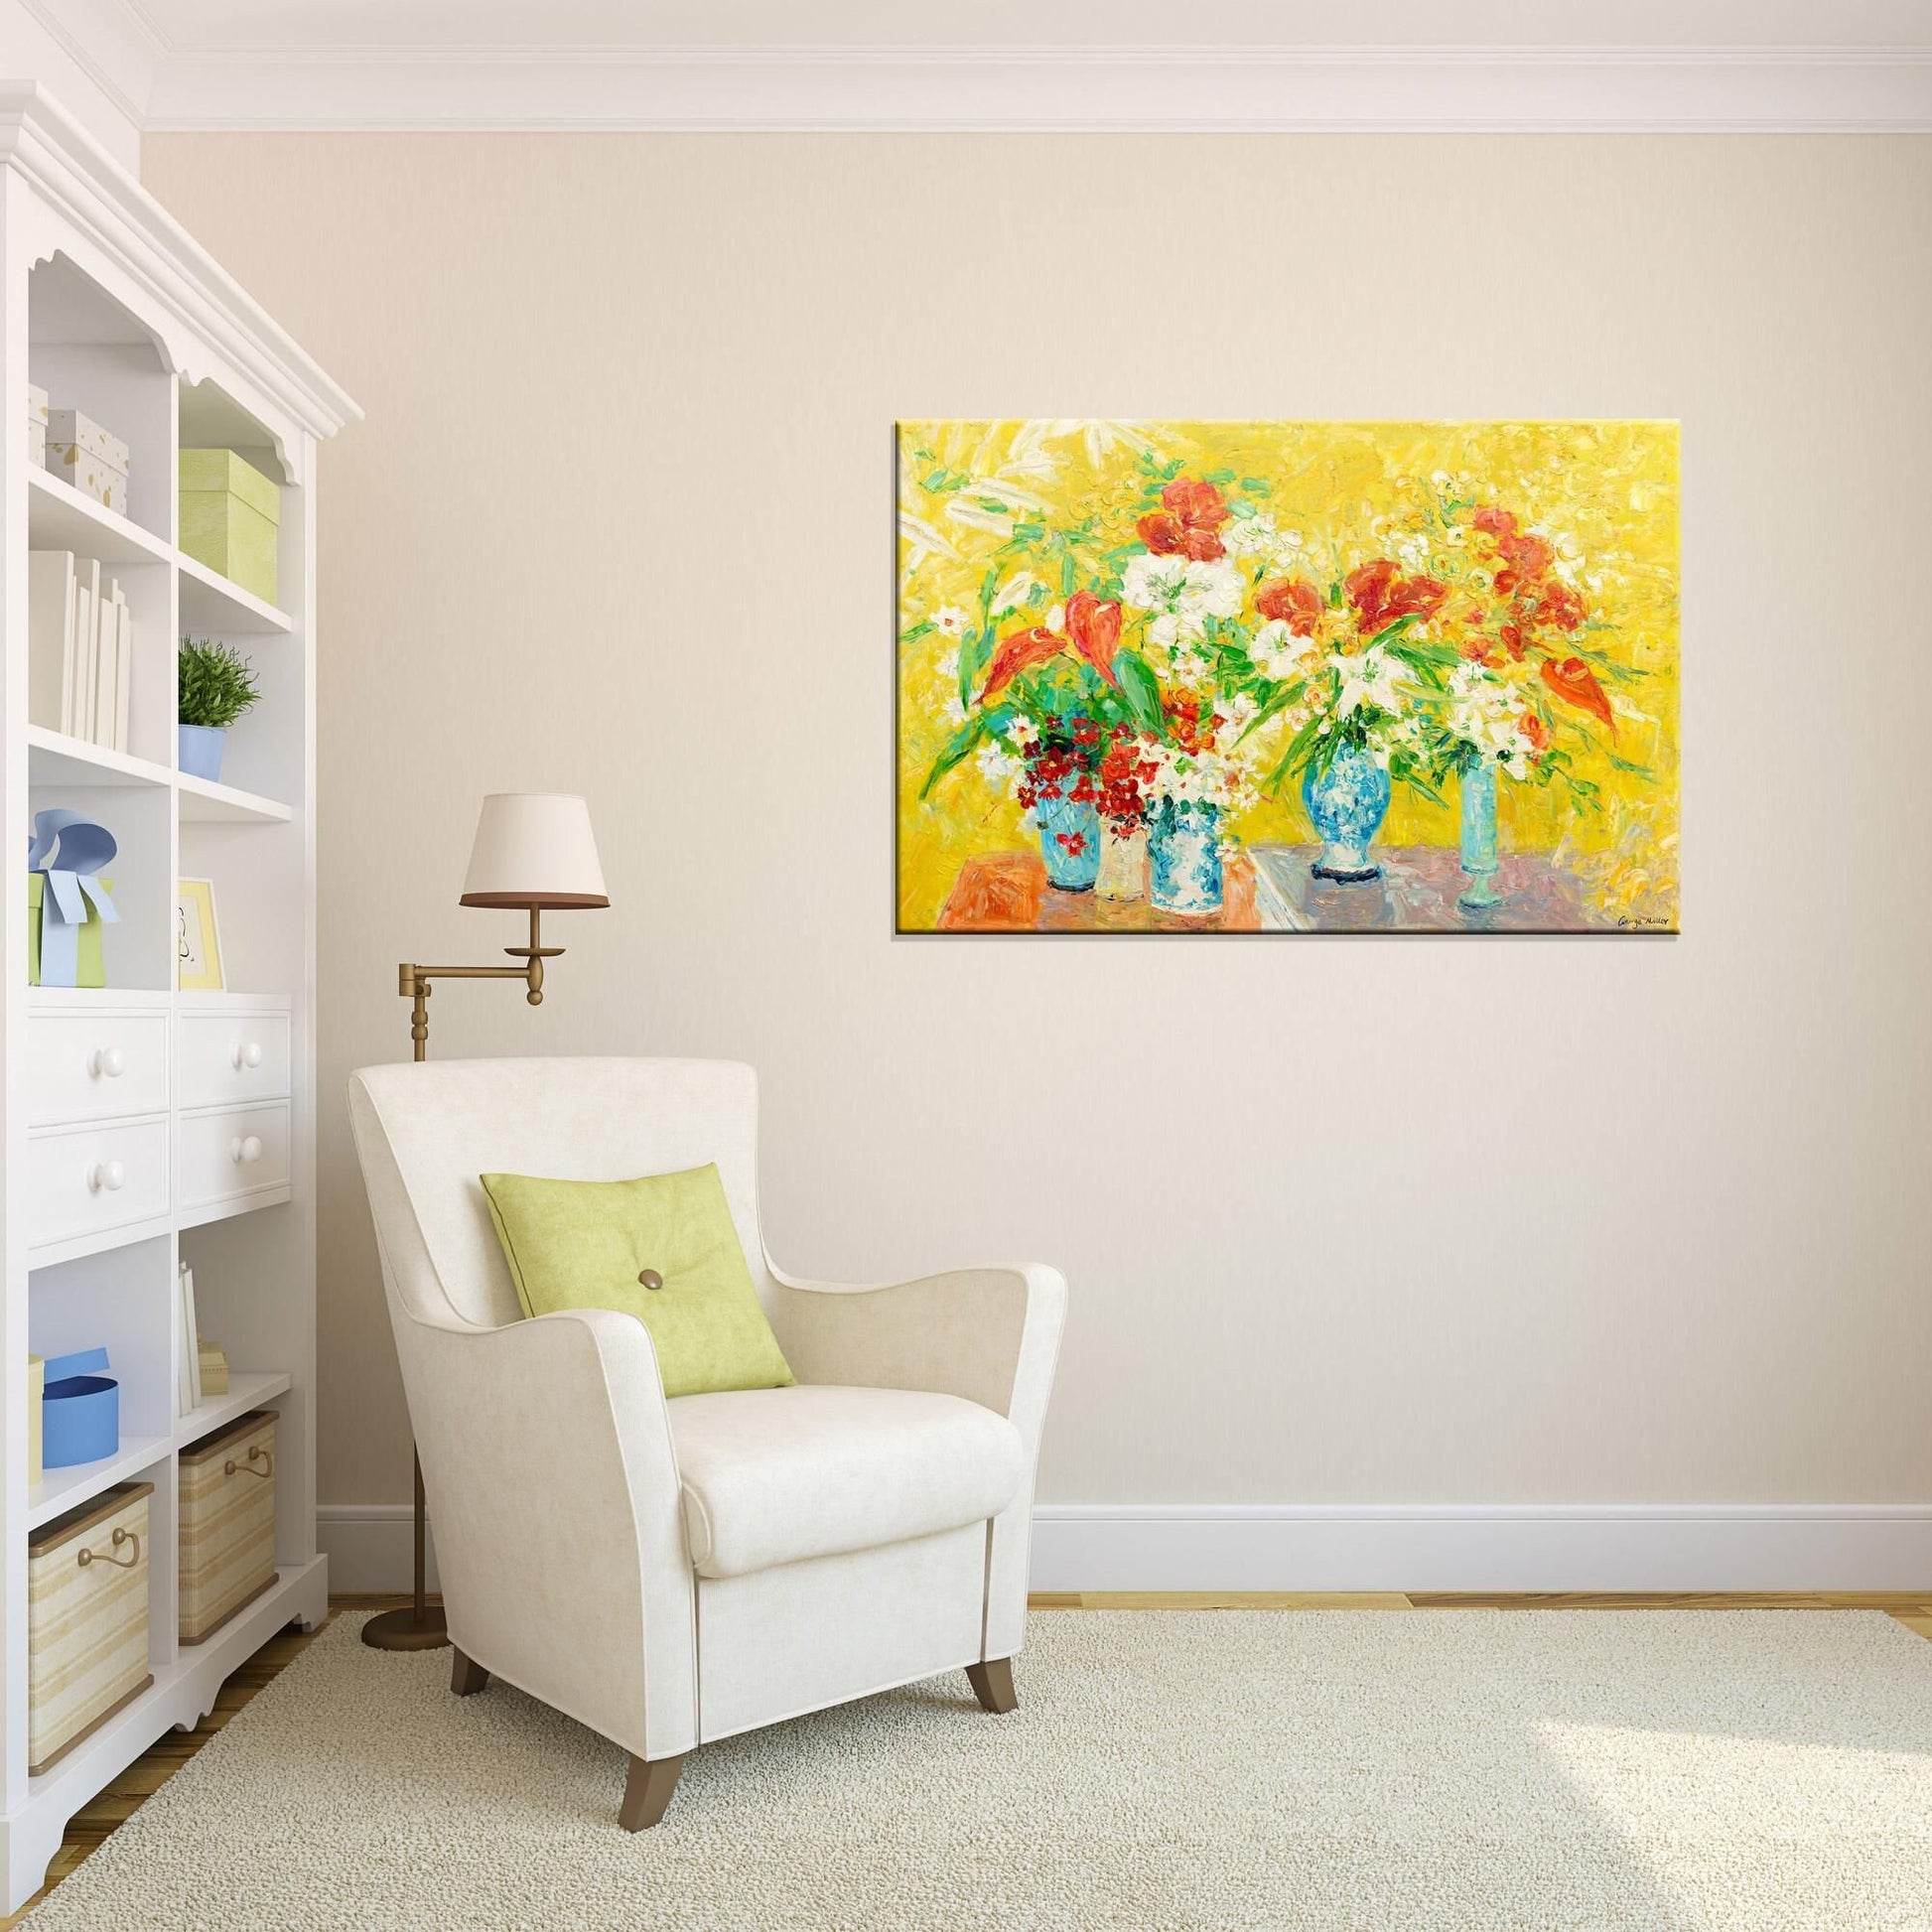 Oil Painting, Flower Painting, Large Painting, Modern Painting, Abstract Canvas Painting, Flower Art, Abstract Art, Original Oil Painting